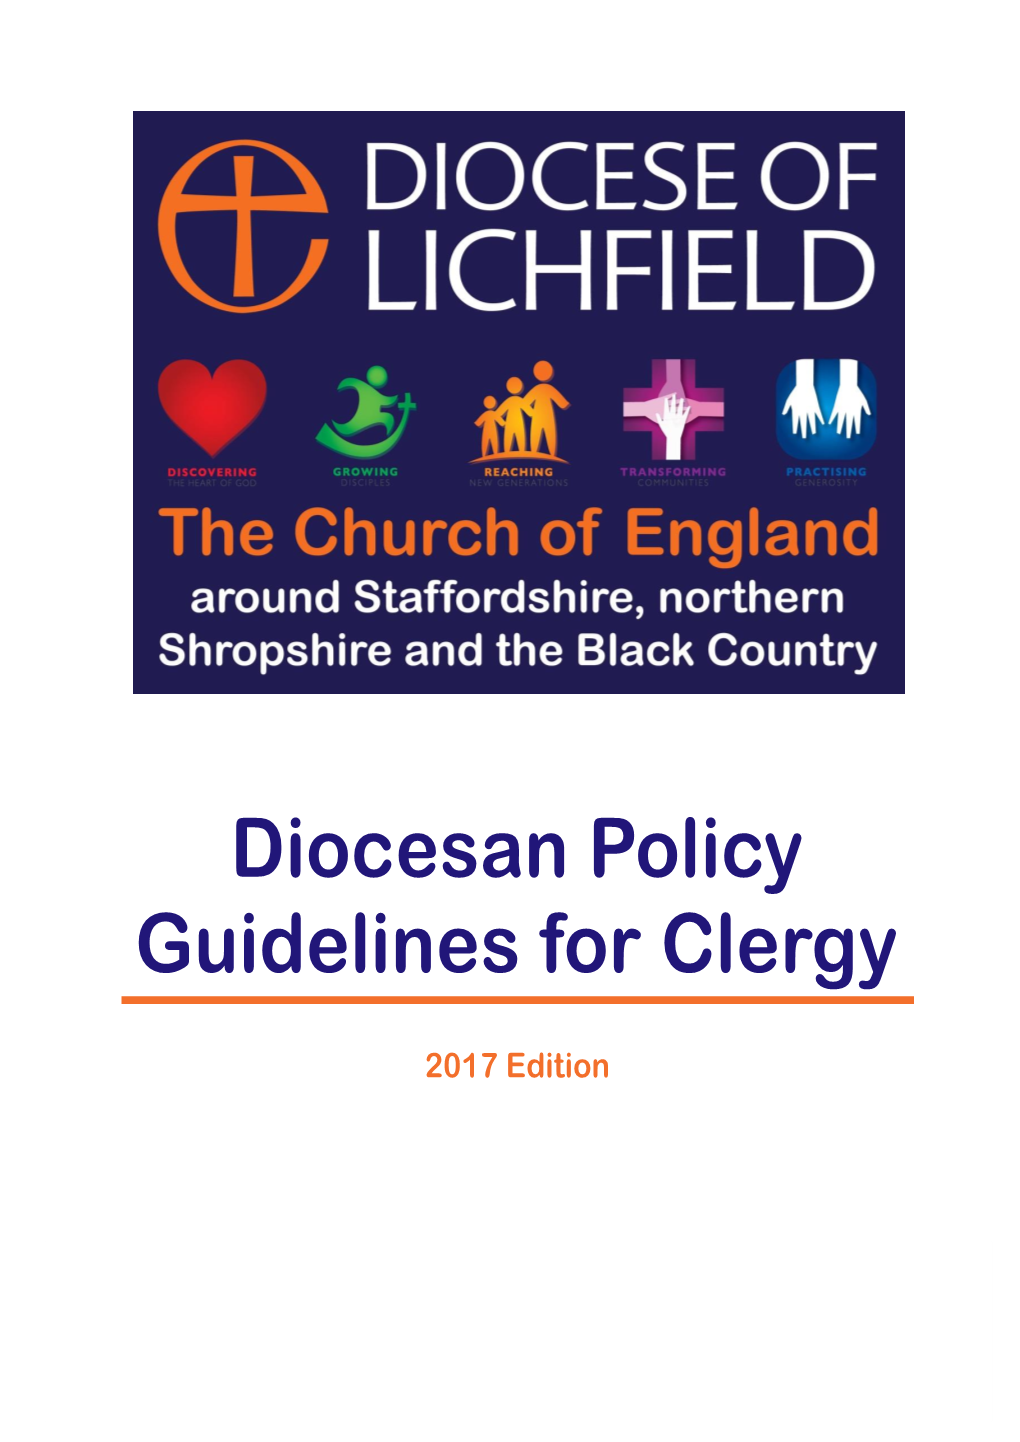 Diocesan Policy Guidelines for Clergy